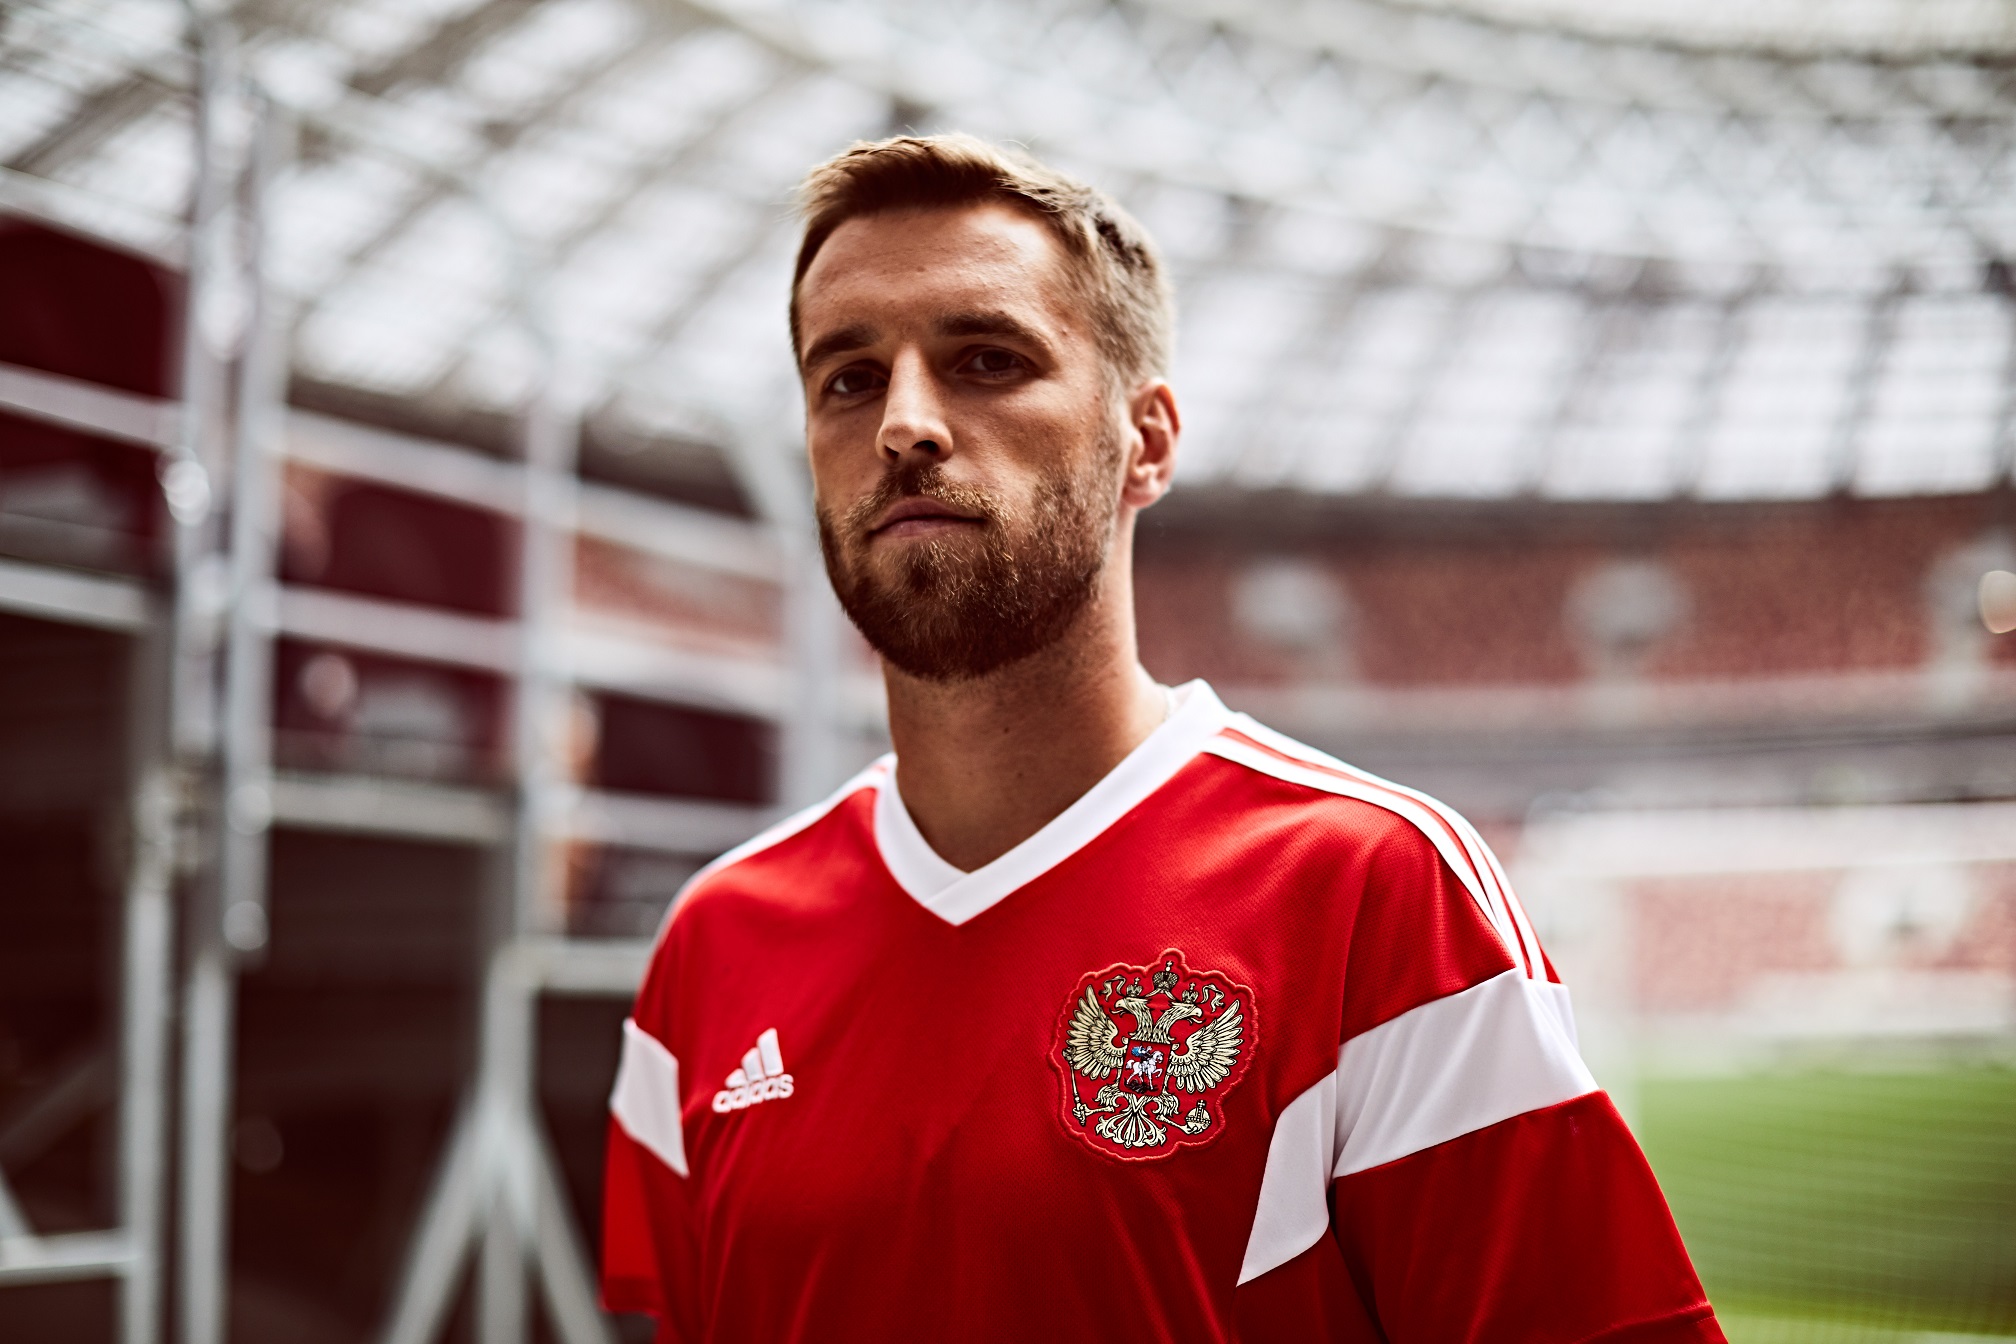 Russia's home shirt for the 2018 World Cup in Russia